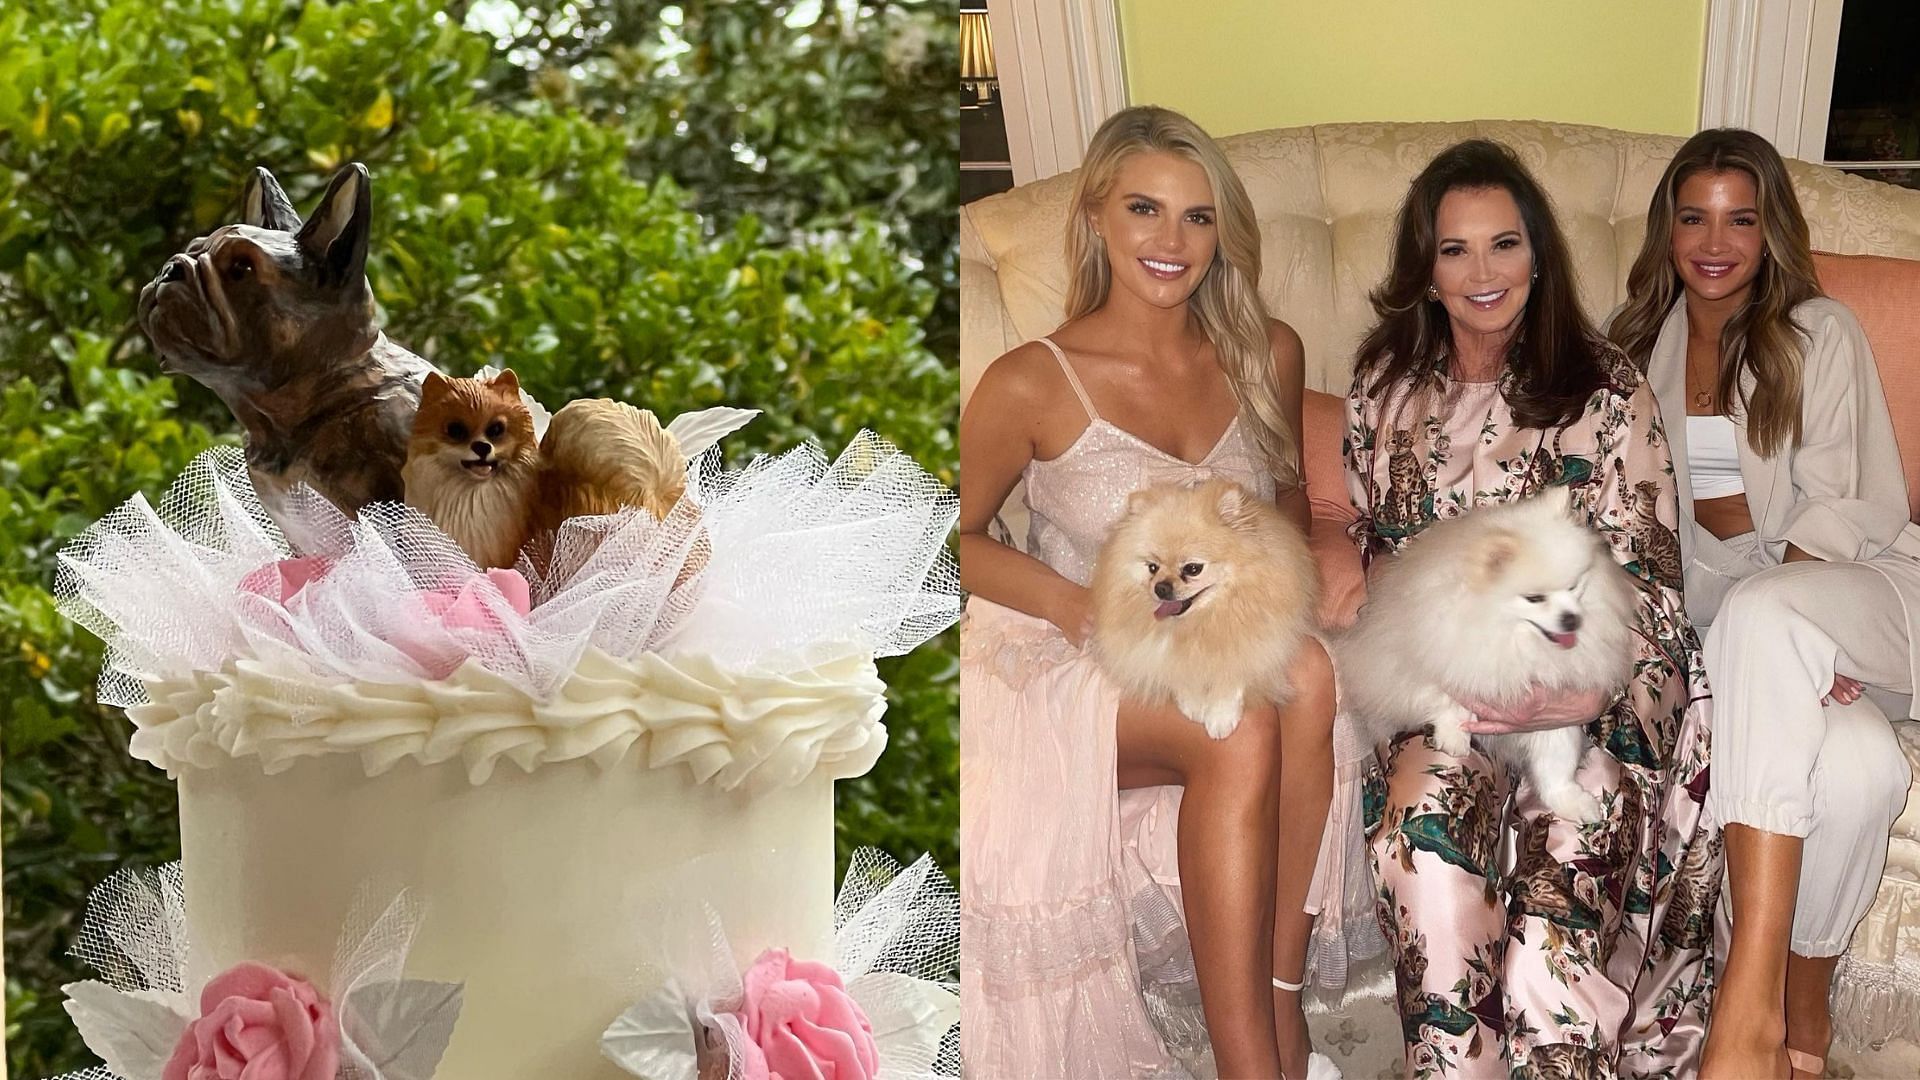 Southern Charm Season 8 Episode 8 was all about a dog&#039;s wedding (Image via pataltschul/Instagram)